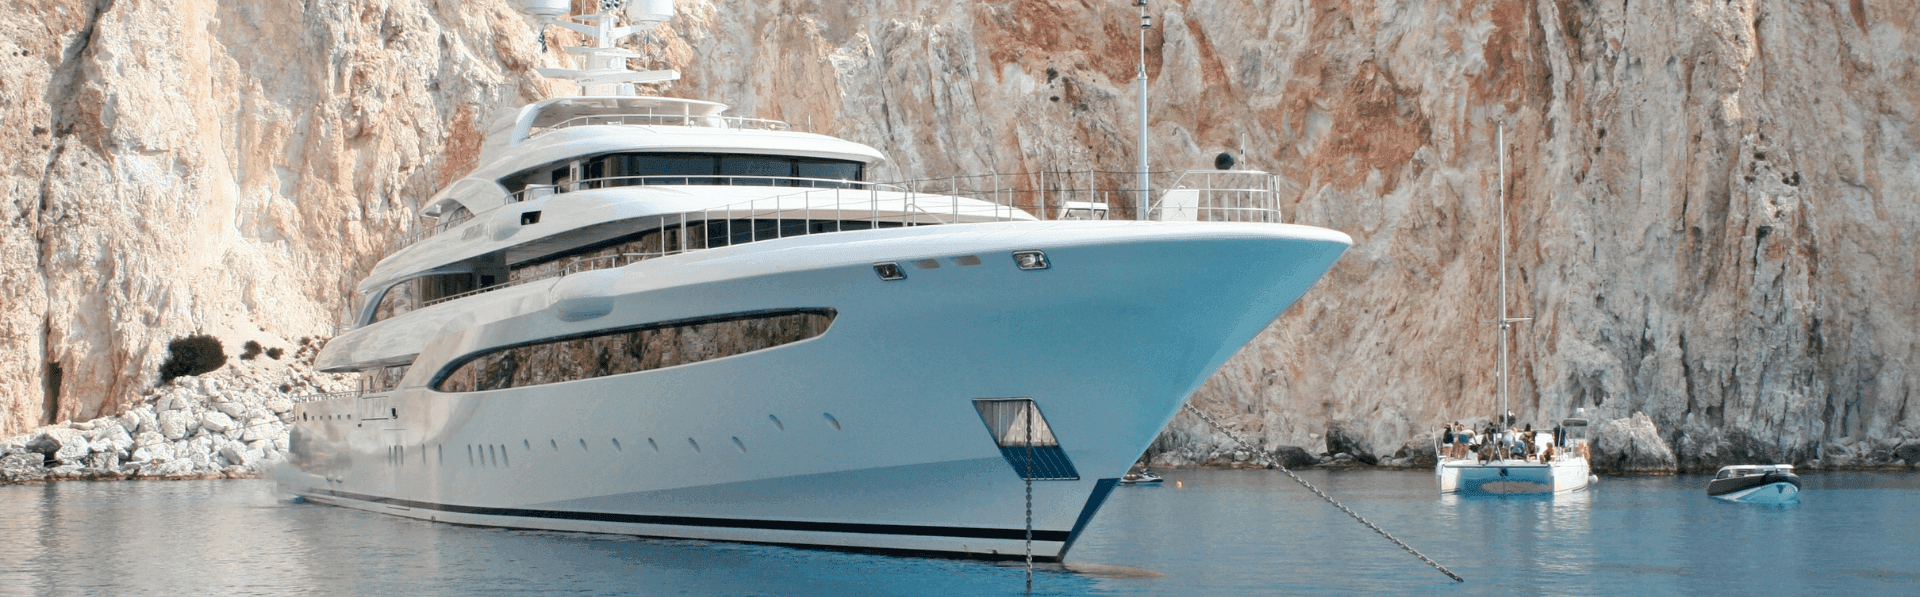 Ritzy Charters: Your Best Choice Yacht Charter Broker